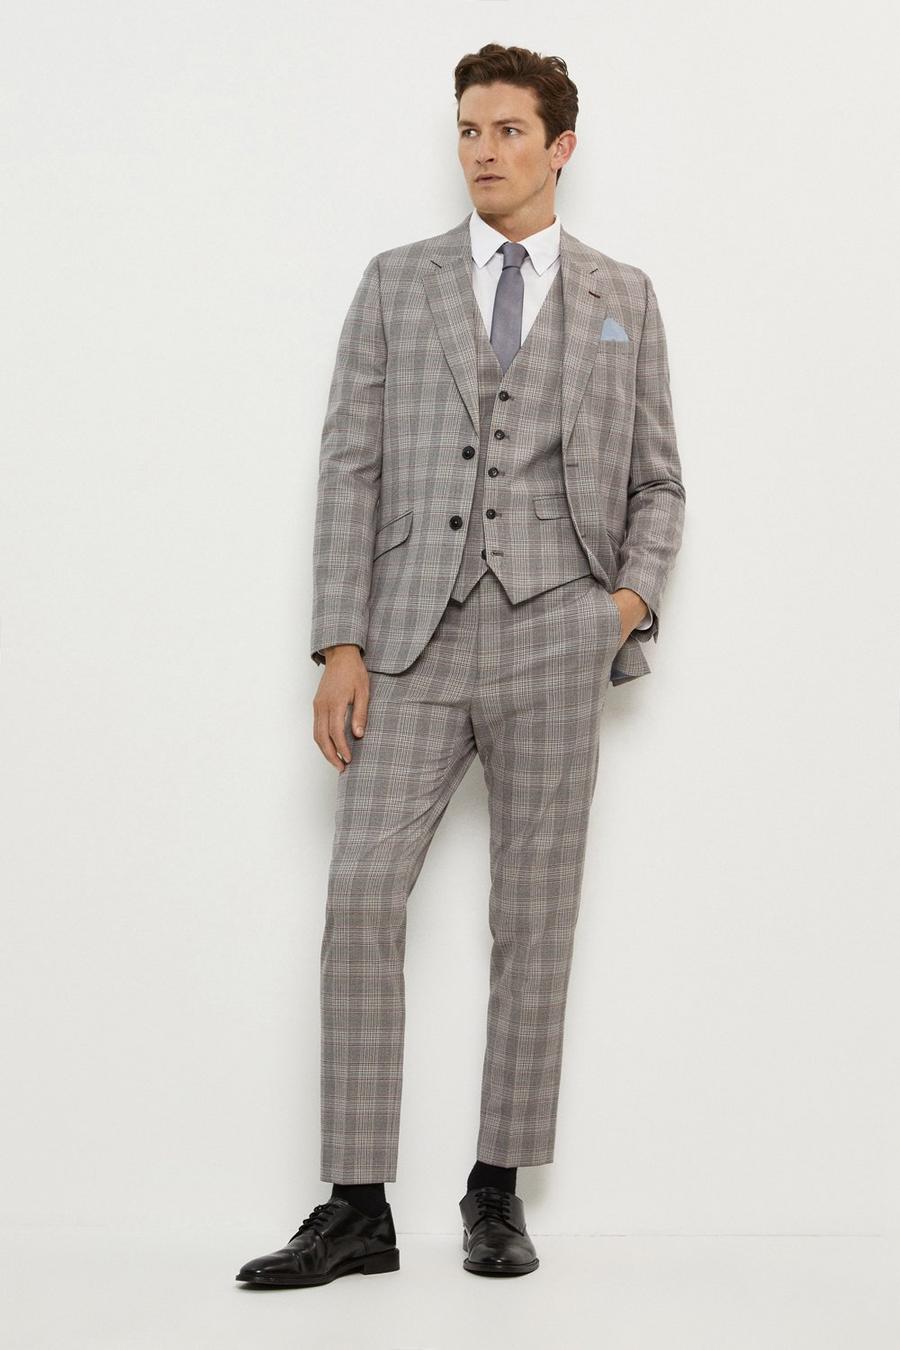 Skinny Grey And Burgundy Check Three-Piece Suit